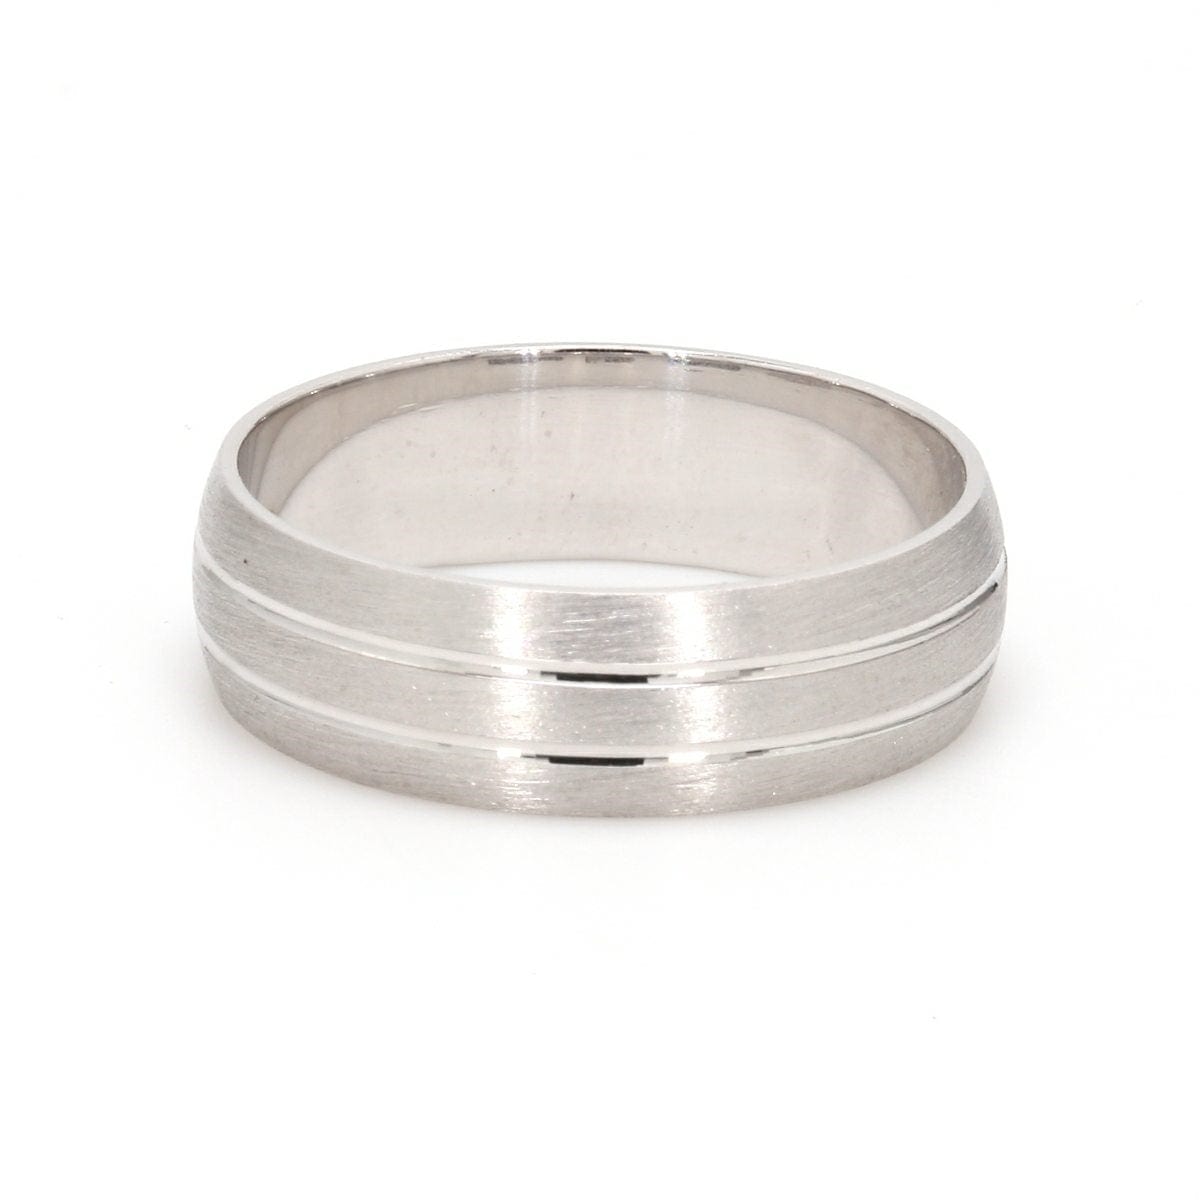 925 Sterling Silver Plain Toe Ring Size: Standard at Best Price in Agra |  R. B. Chains